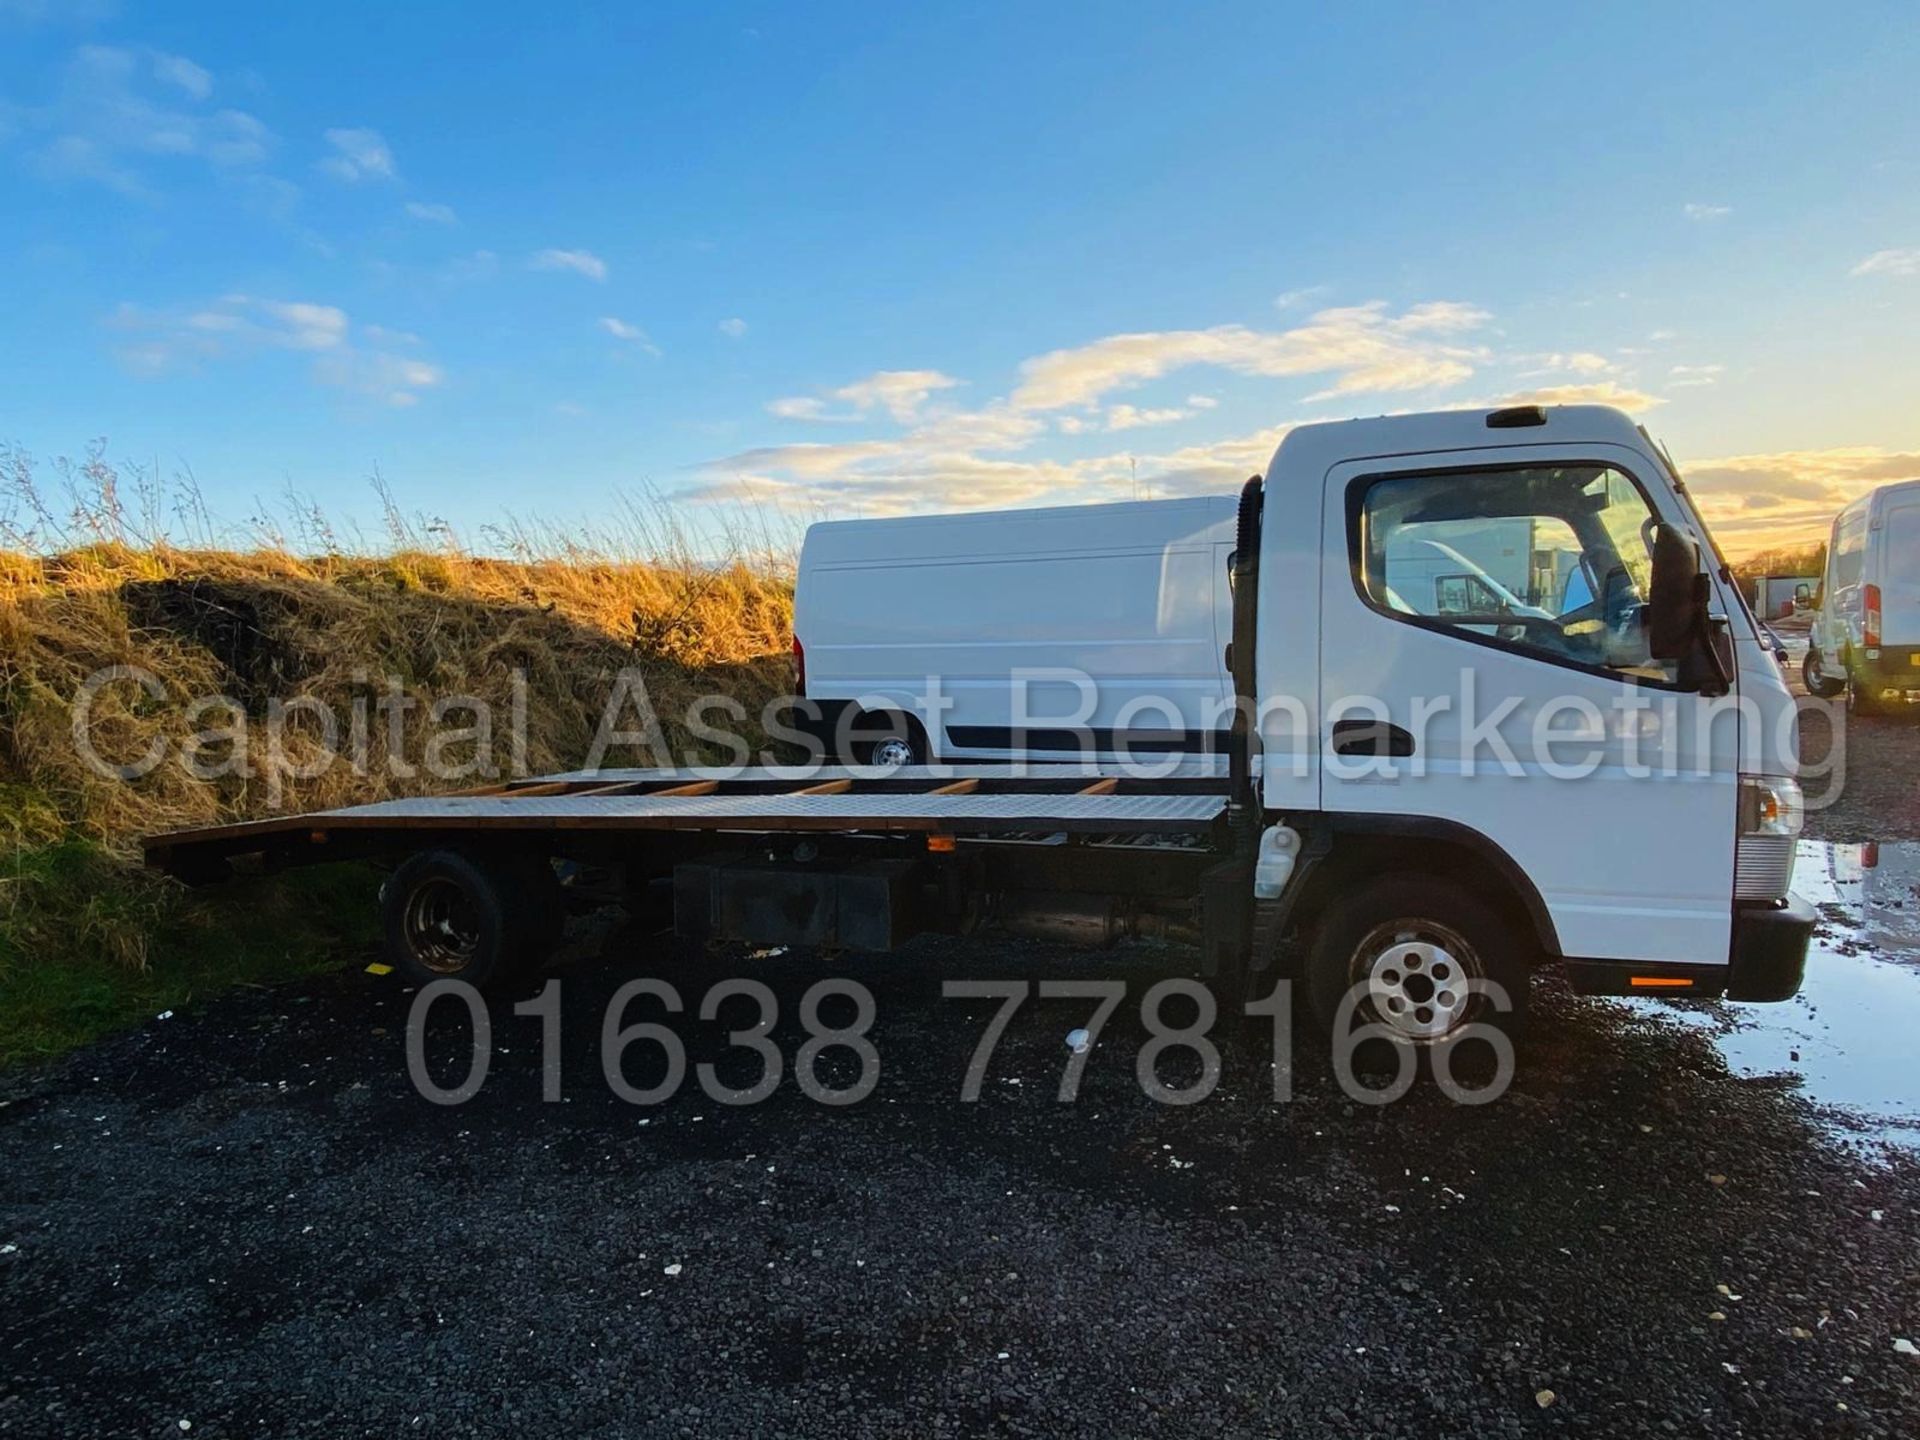 (ON SALE) MITSUBISHI FUSO CANTER 3C13 38 *LWB - RECOVERY TRUCK* (2013) '3.0 DIESEL - 130 BHP - AUTO - Image 6 of 23